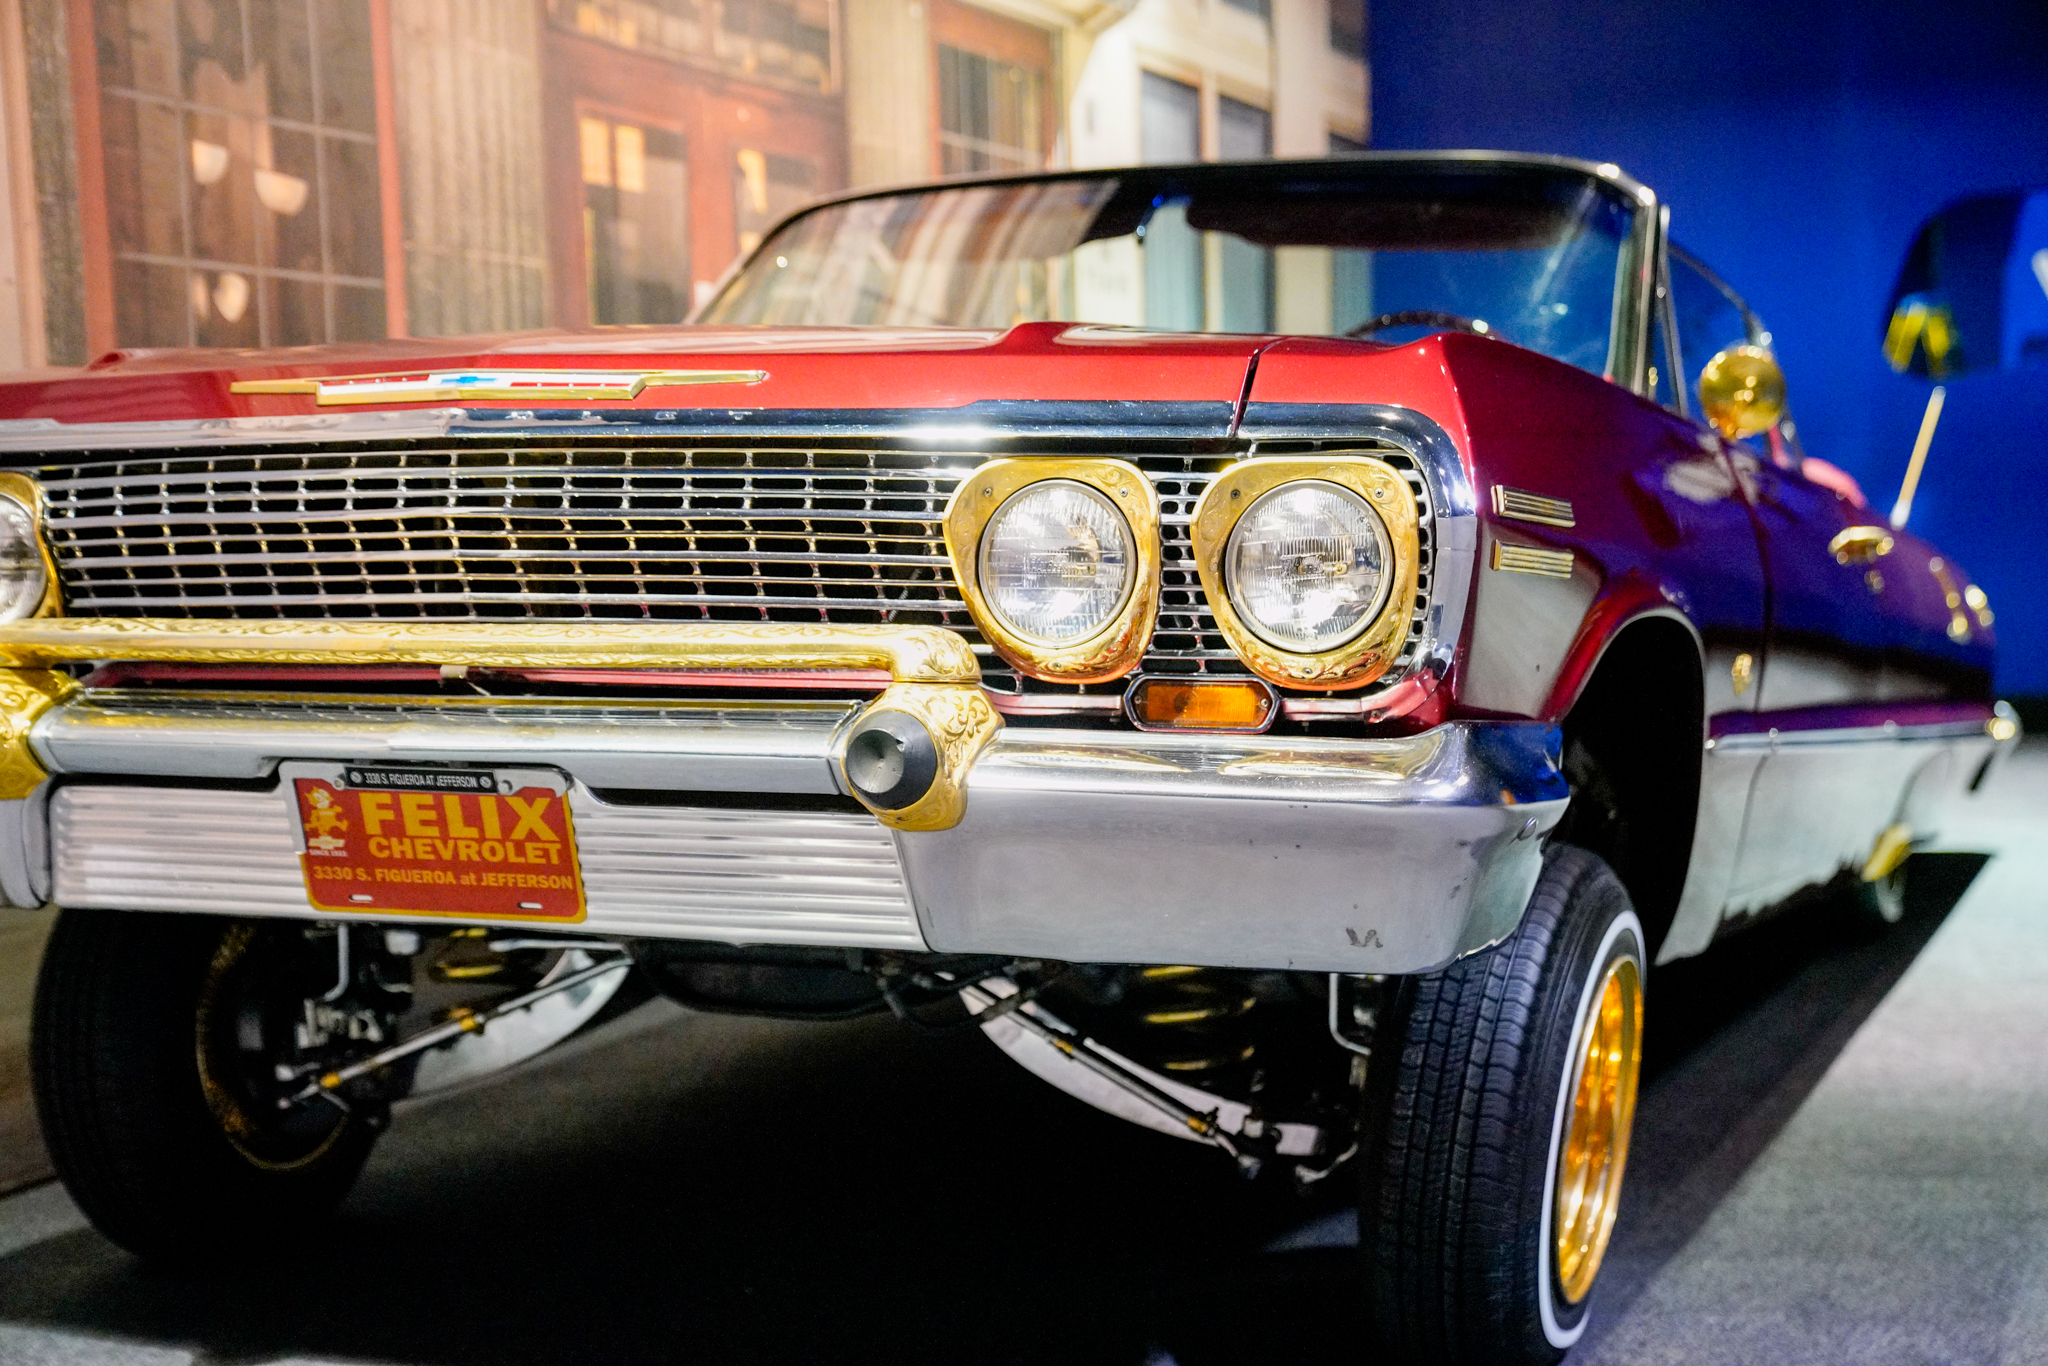 ​​Carros y Cultura exhibition features lowrider cars and bicycles highlighting the rich culture of the Texas lowriding community. 1963 Chevy Impala courtesy Raul Rodriguez Jr., Round Rock